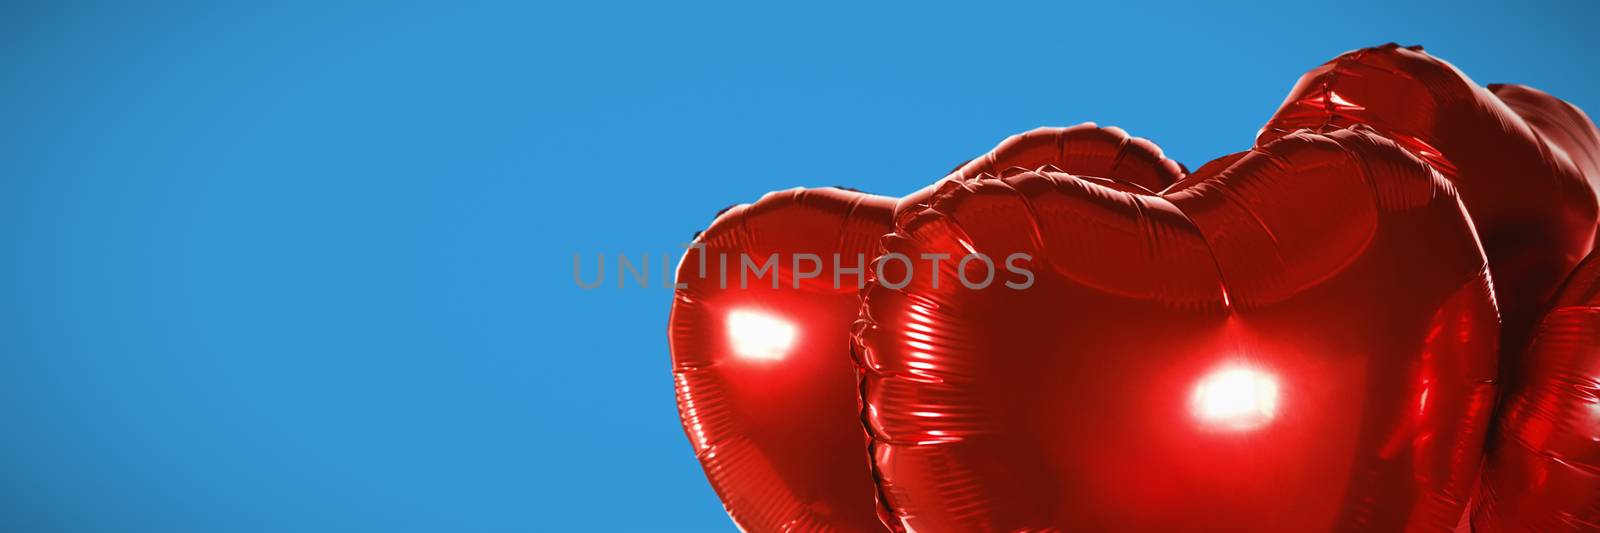 Red heart shape balloons against blue background